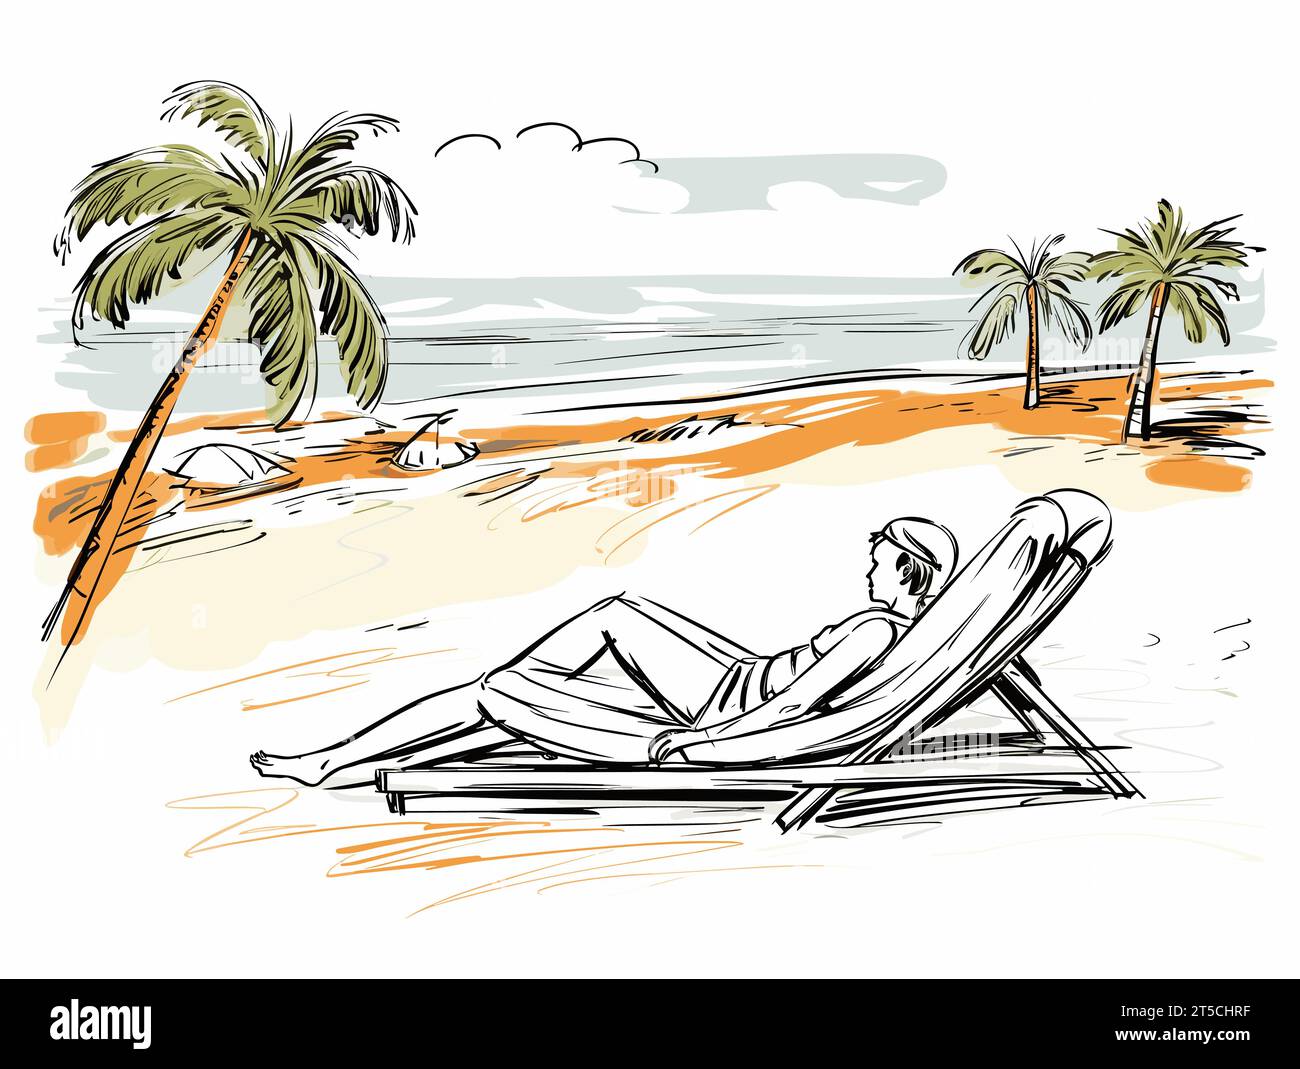 Drawing of Relax on beach illustration separated, sweeping overdrawn lines. Stock Vector